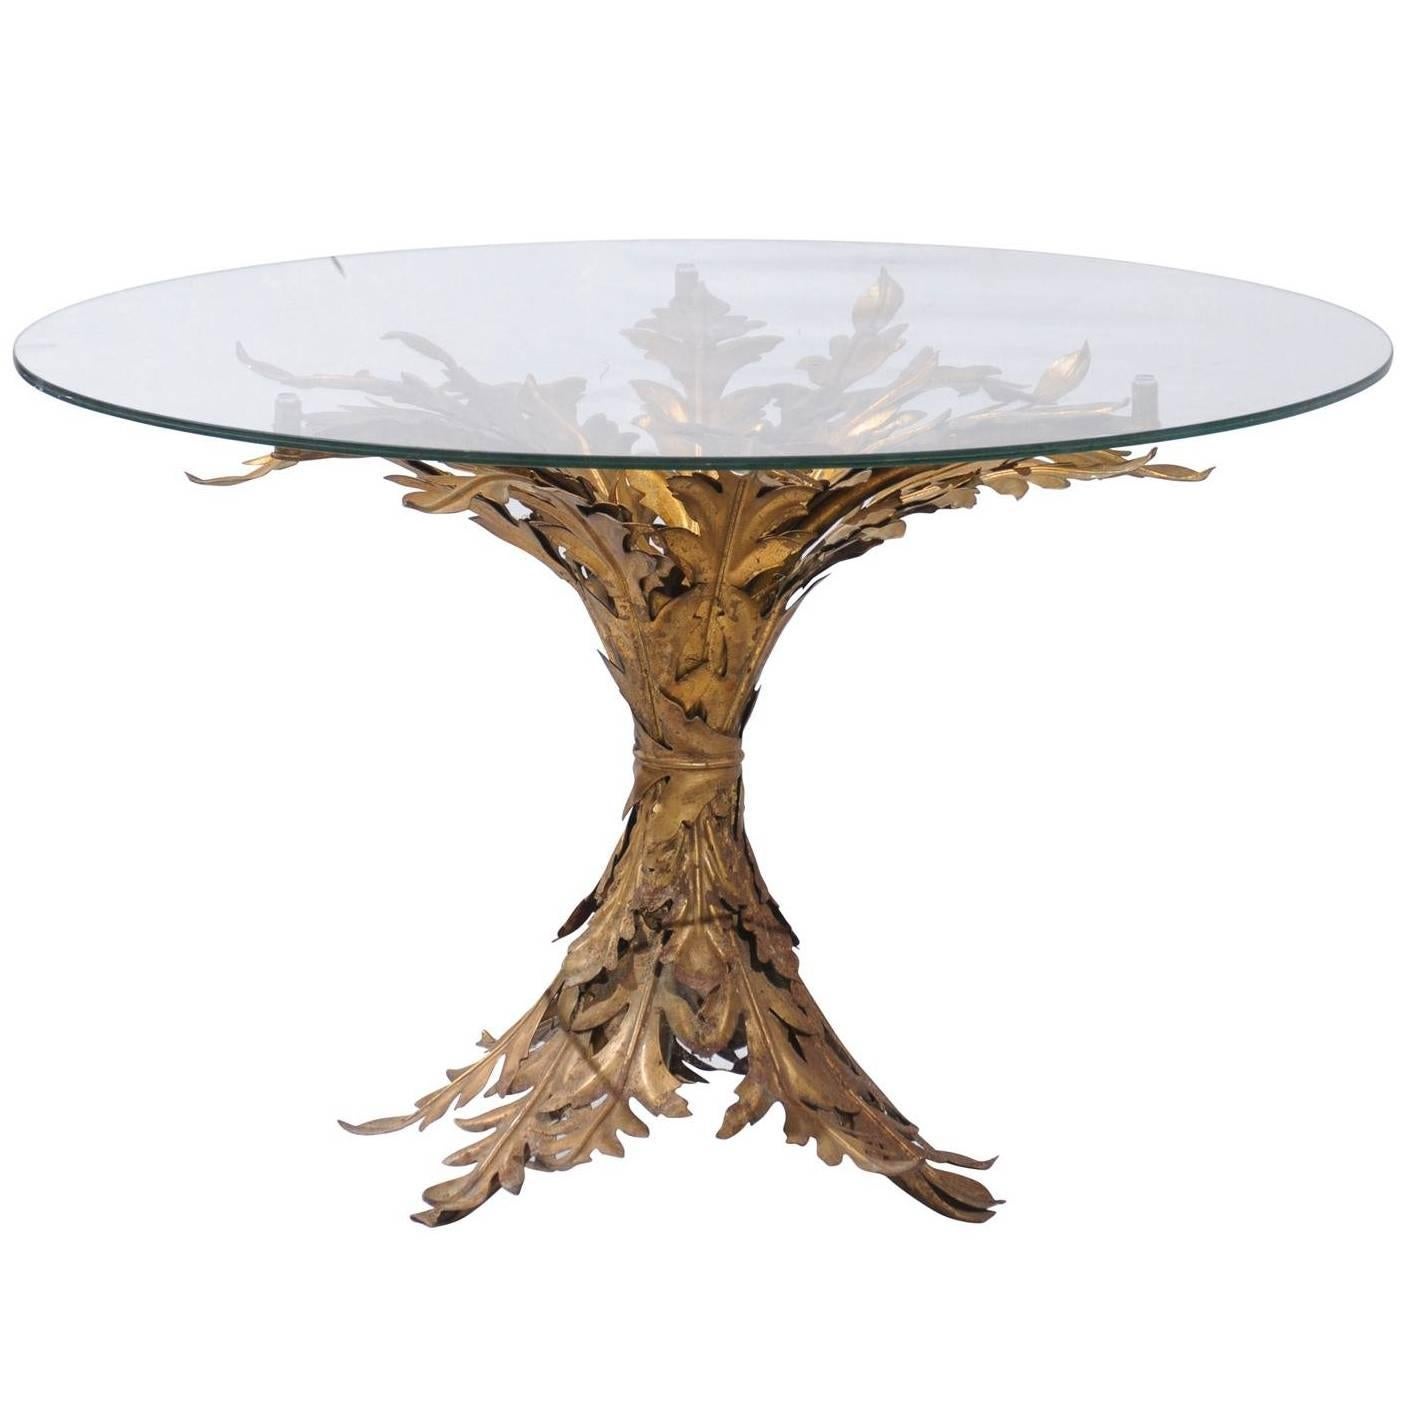 Italian Mid-20th Century Gilt Metal Leaf Pedestal Round Table with Glass Top For Sale